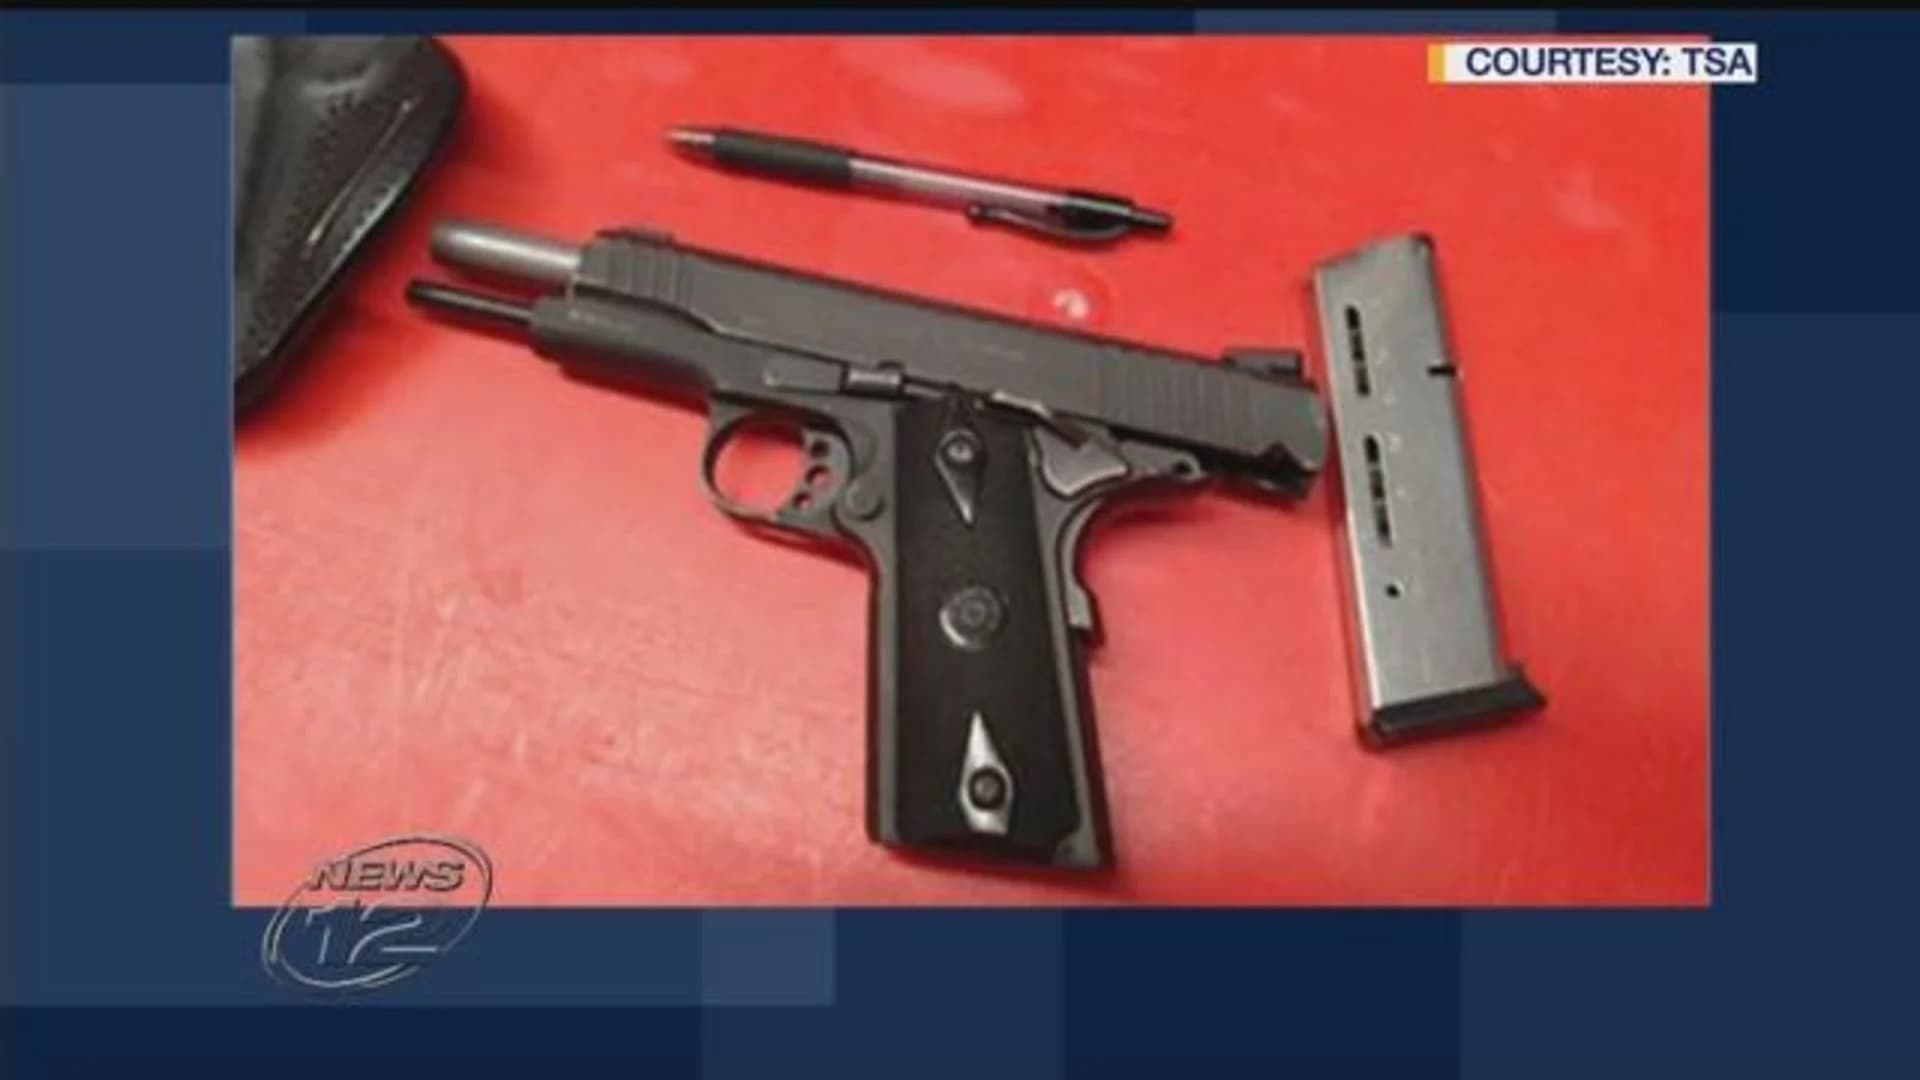 Competitive shooter charged after gun found in luggage at Newark Liberty